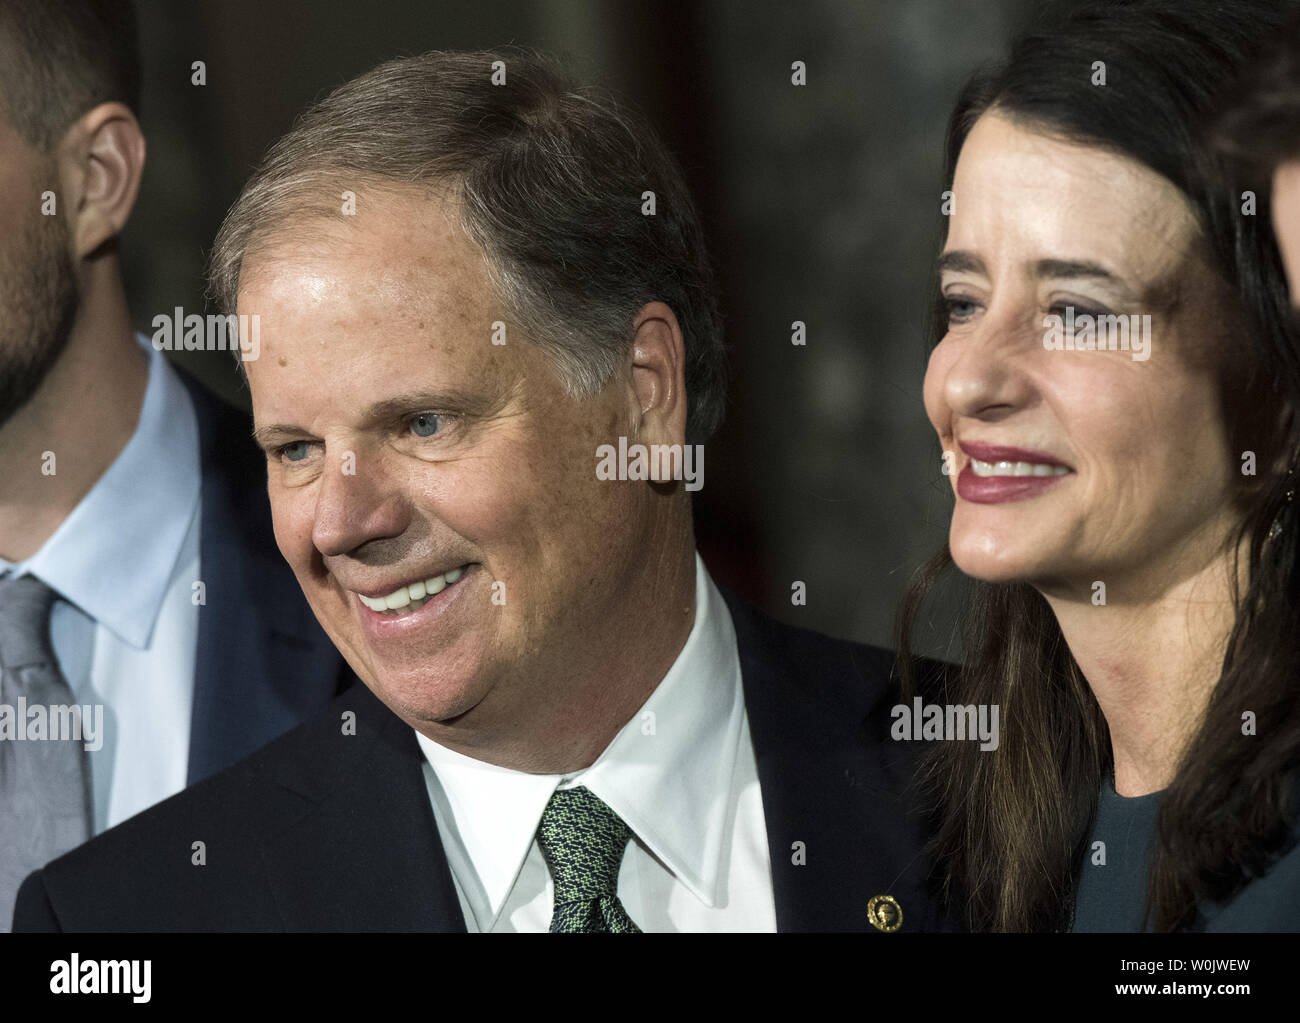 Newly elected Senator Doug Jones, D-AL, smiles alongside his wife Louise, after he was sworn in to the U.S. Senate, on Capitol Hill in Washington, D.C. on January 3, 2018. Photo by Kevin Dietsch/UPI Stock Photo